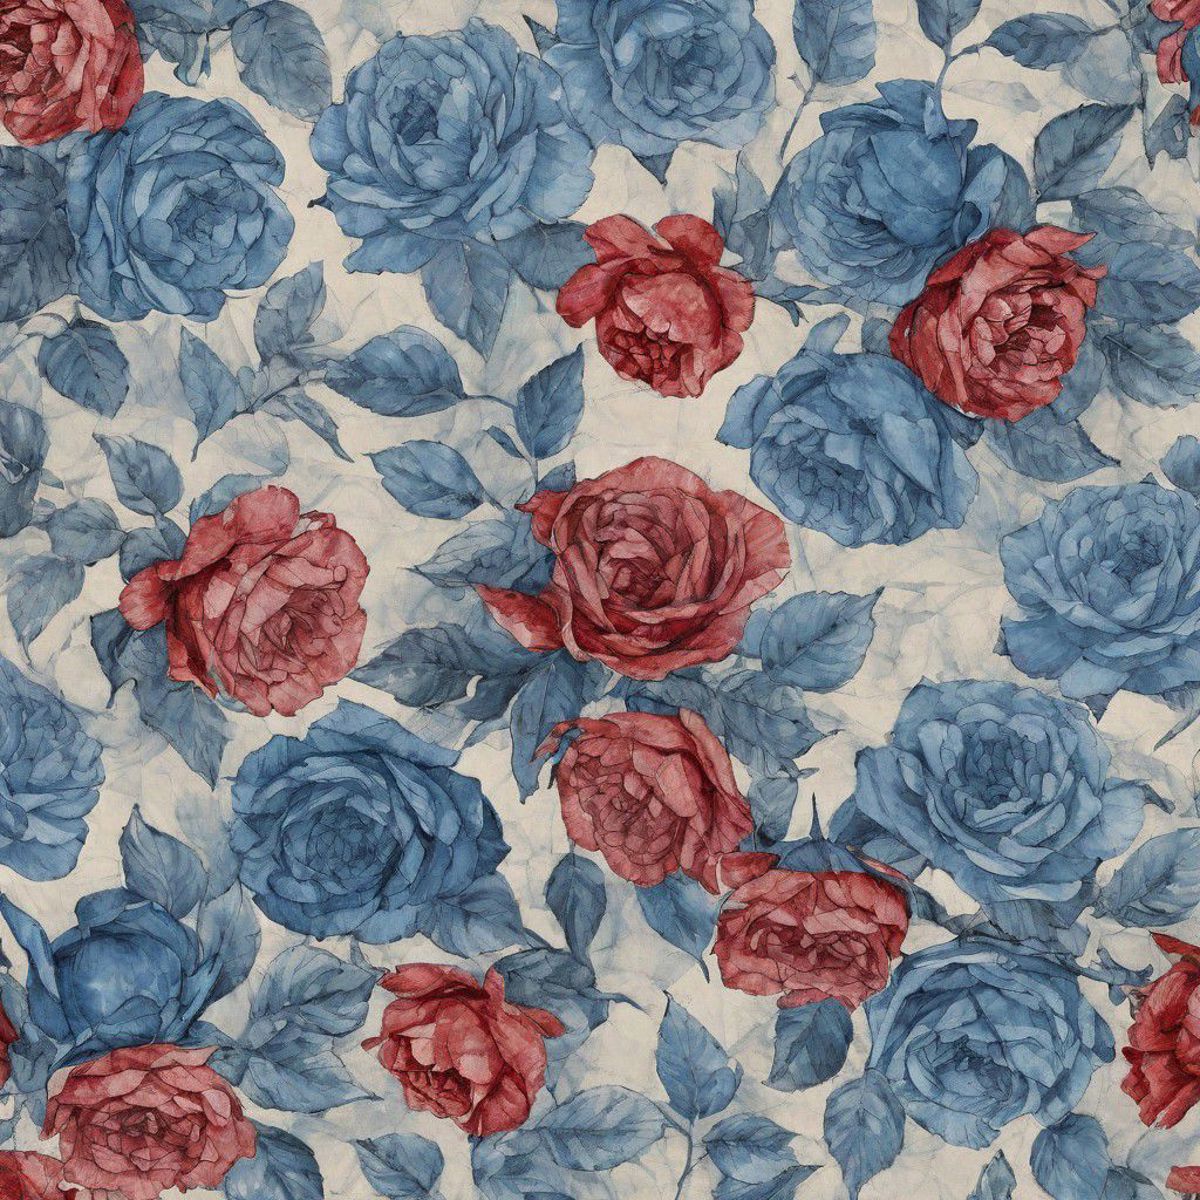 Ditsy Floral Pattern image by aussiedecalf